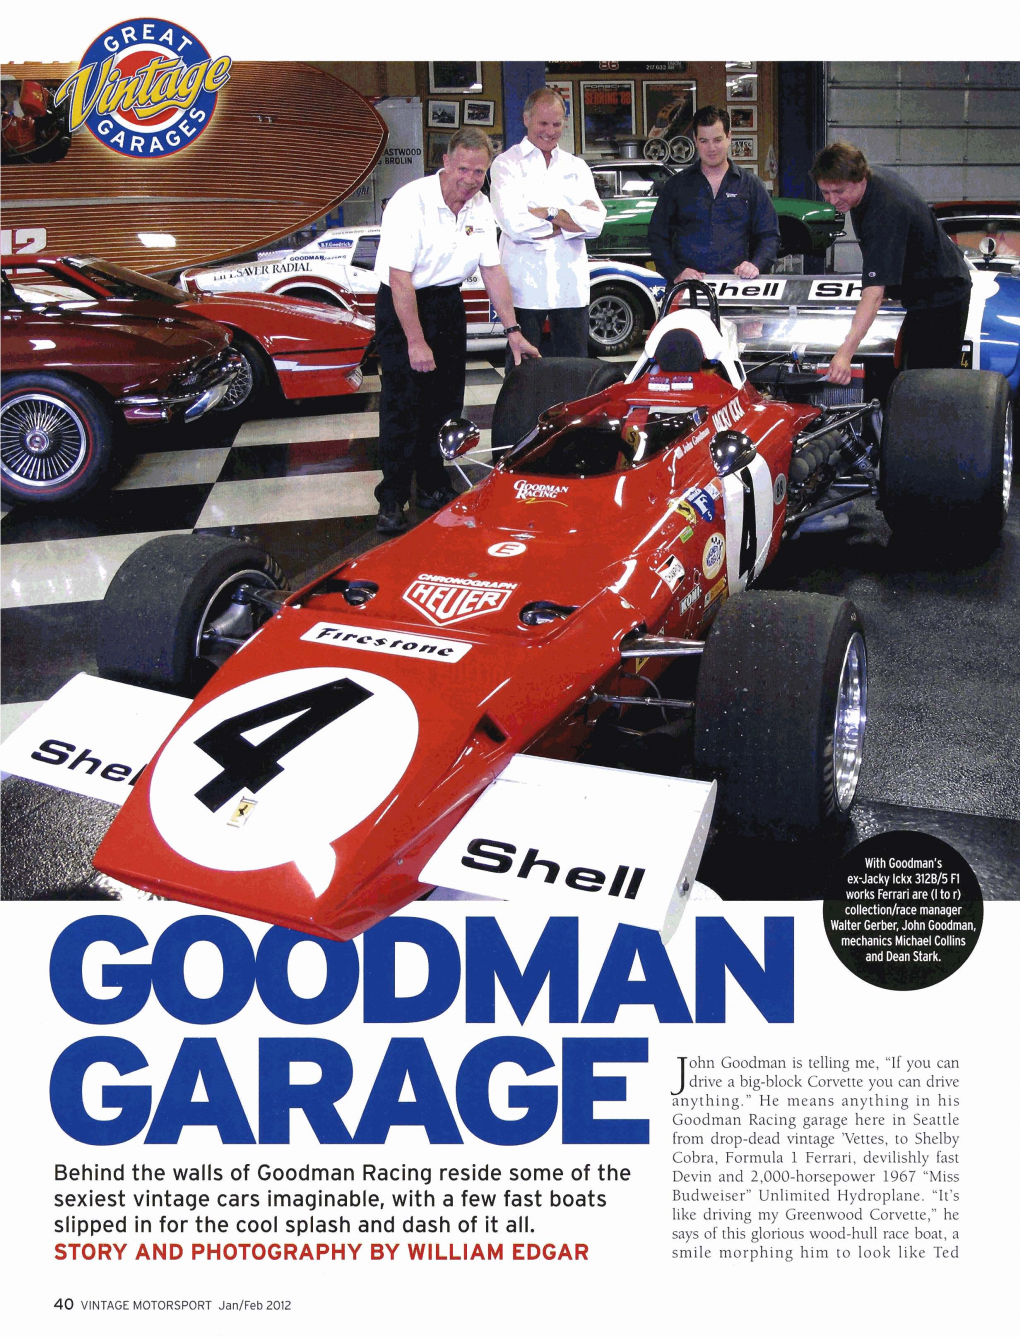 Behind the Walls of Goodman Racing Reside Some of the Sexiest Vintage